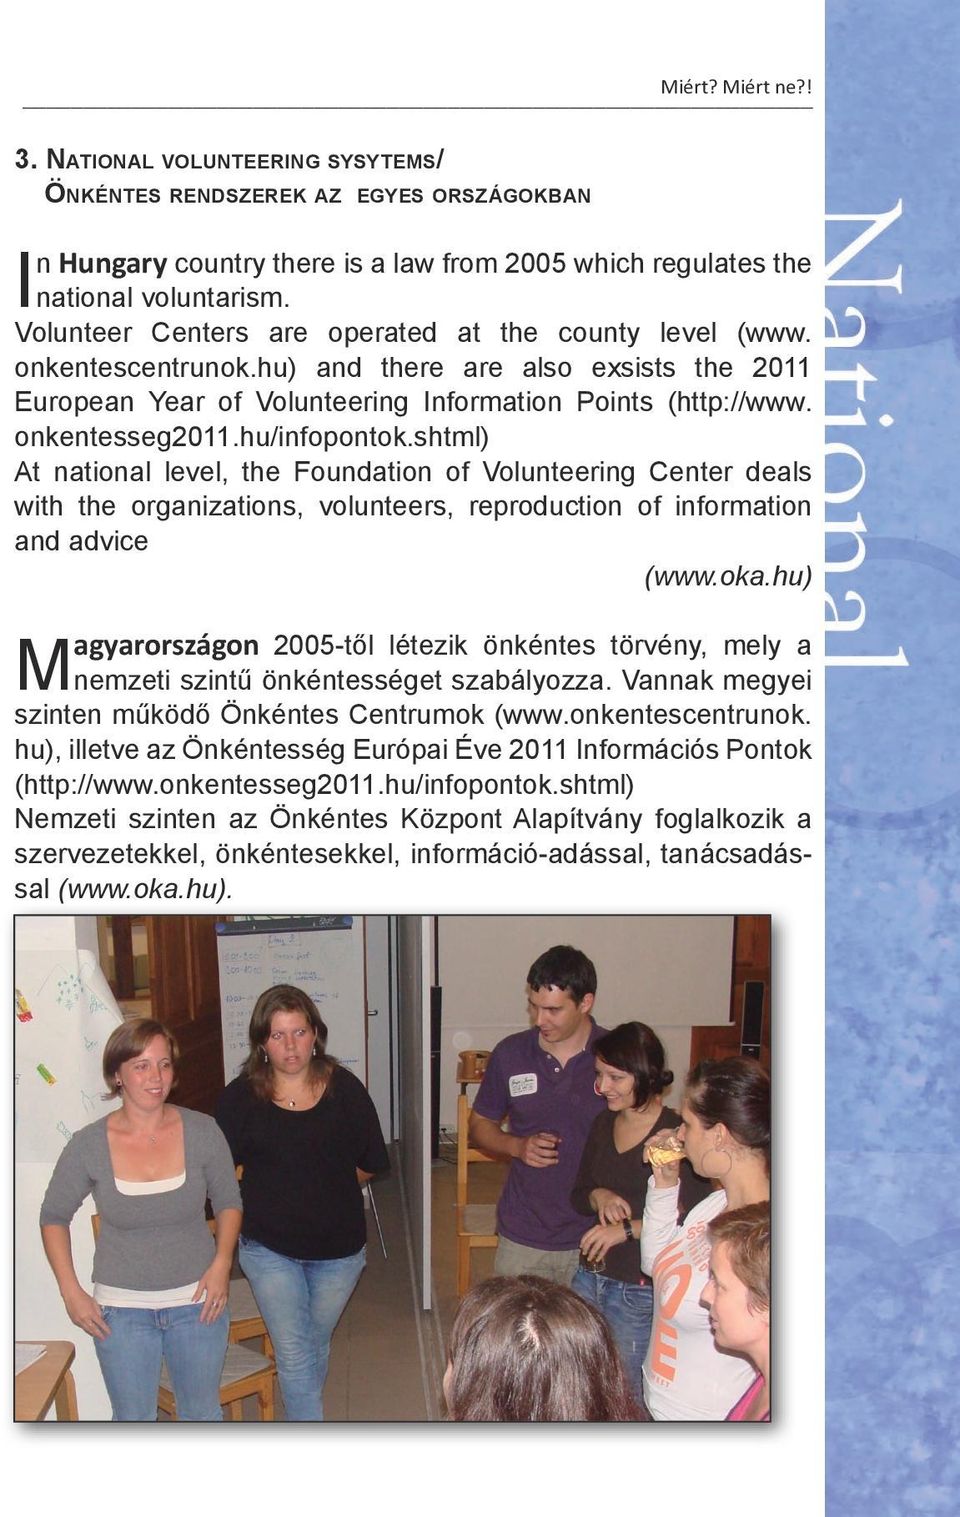 Volunteer Centers are operated at the county level (www. onkentescentrunok.hu) and there are also exsists the 2011 European Year of Volunteering Information Points (http://www. onkentesseg2011.